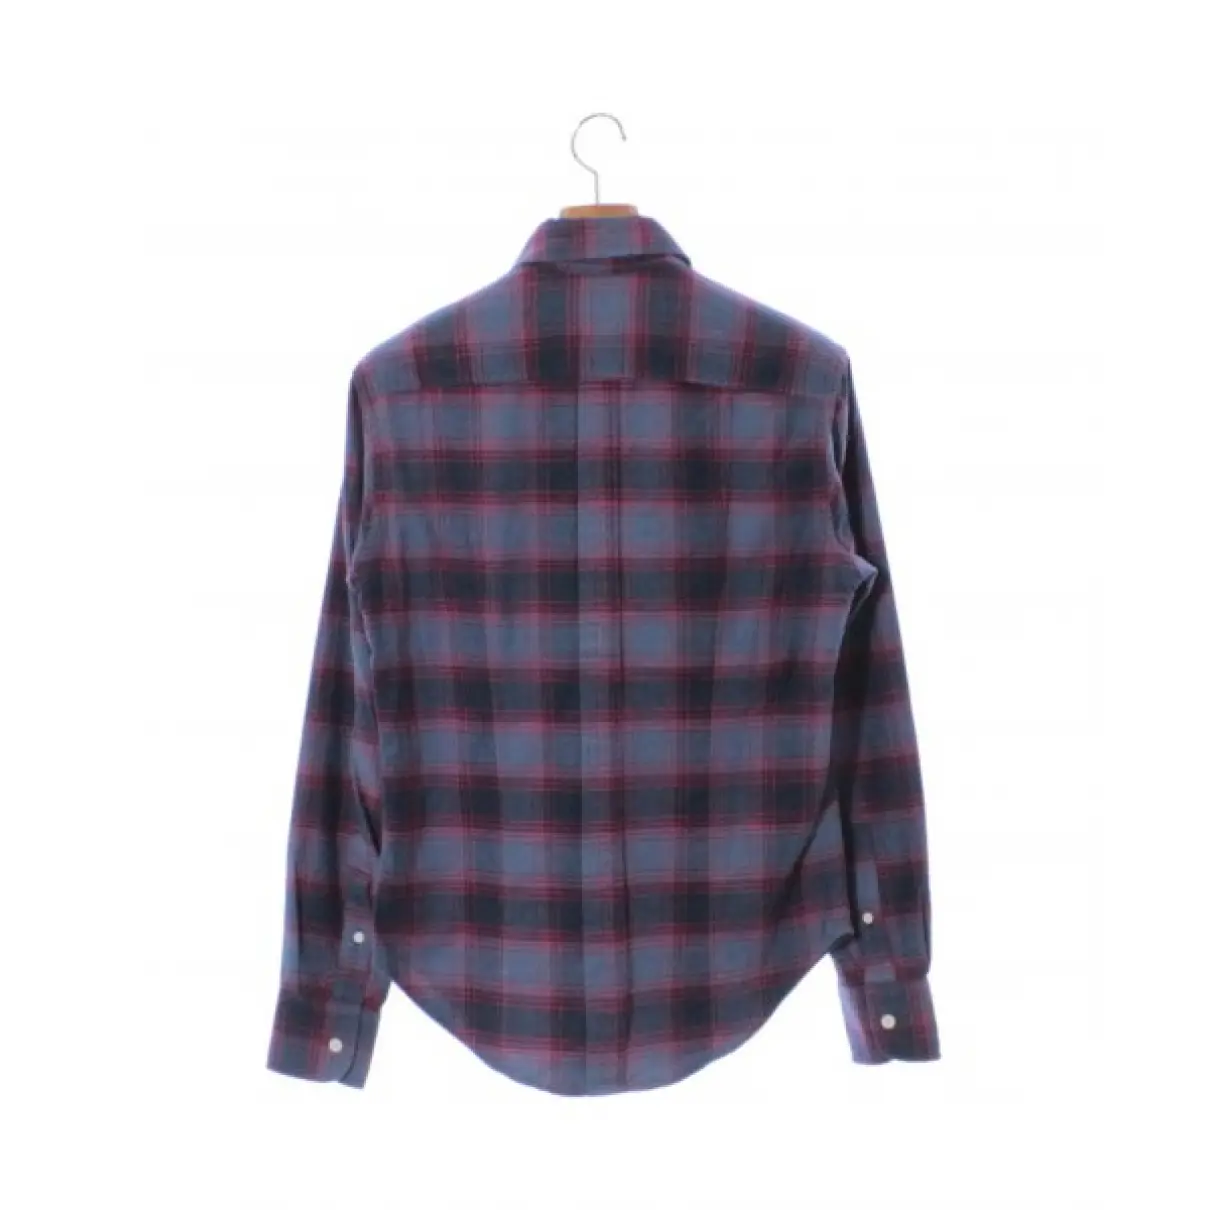 Buy Band Of Outsiders Shirt online